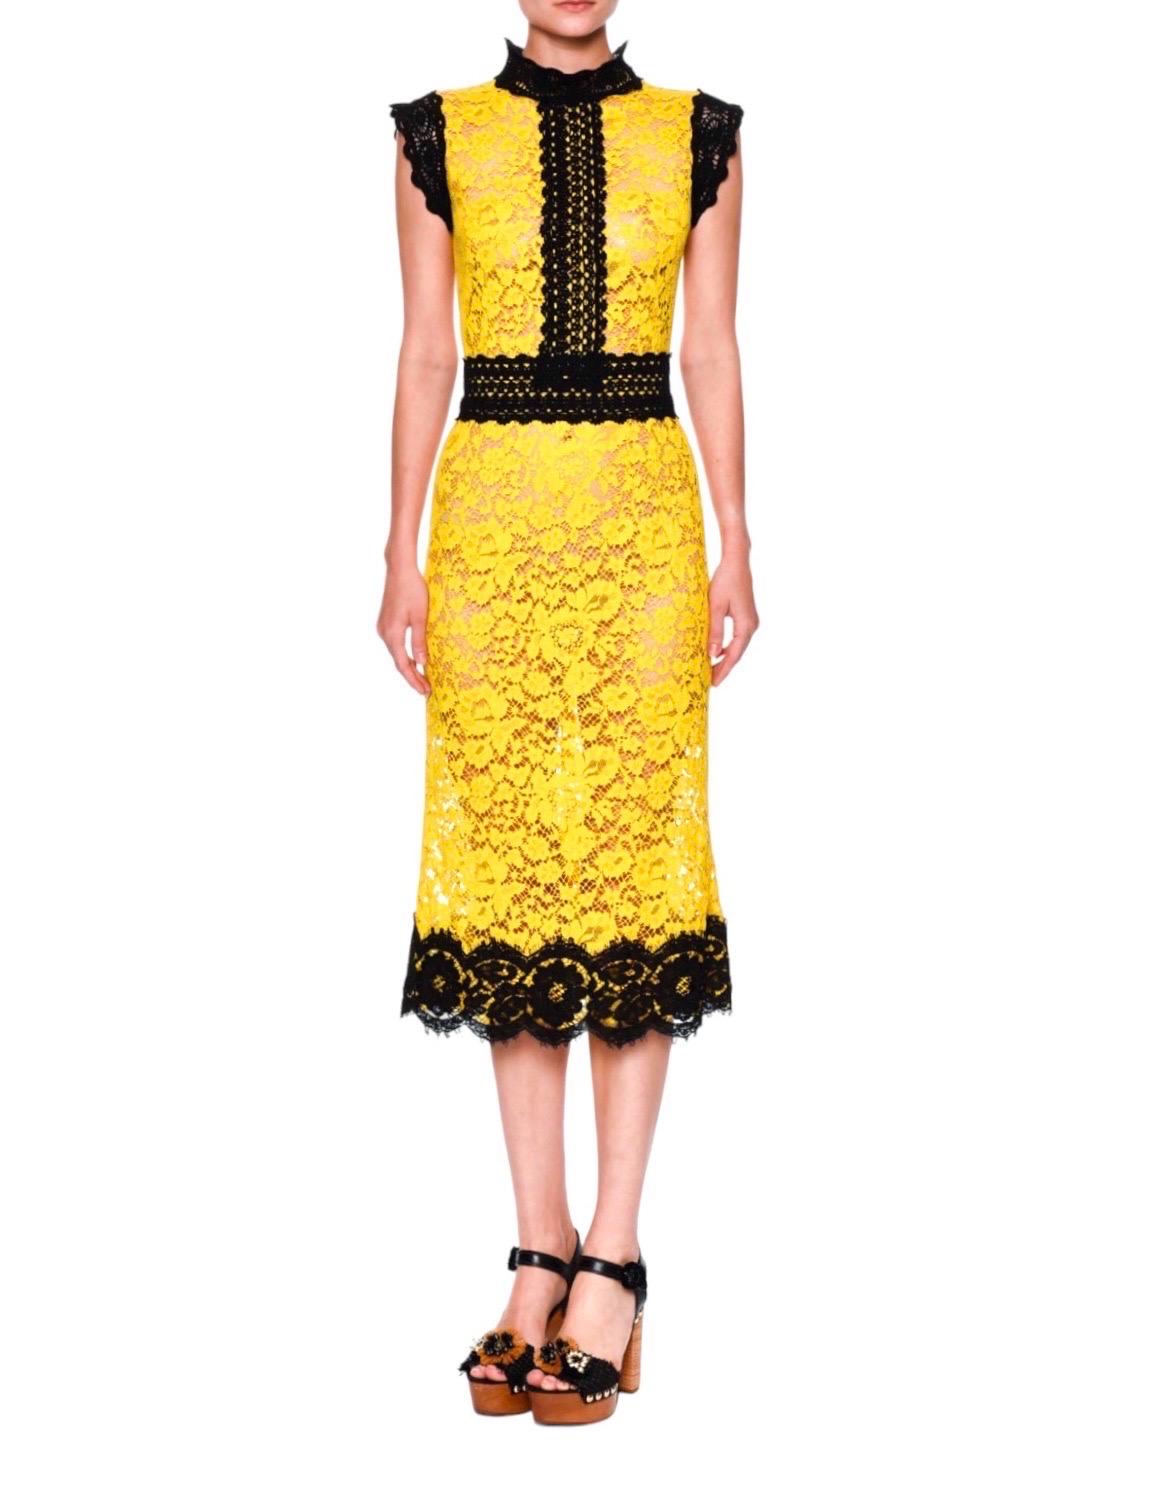 UNWORN Dolce & Gabbana Yellow & Black Guipure Lace Evening Cocktail Dress 40 For Sale 4